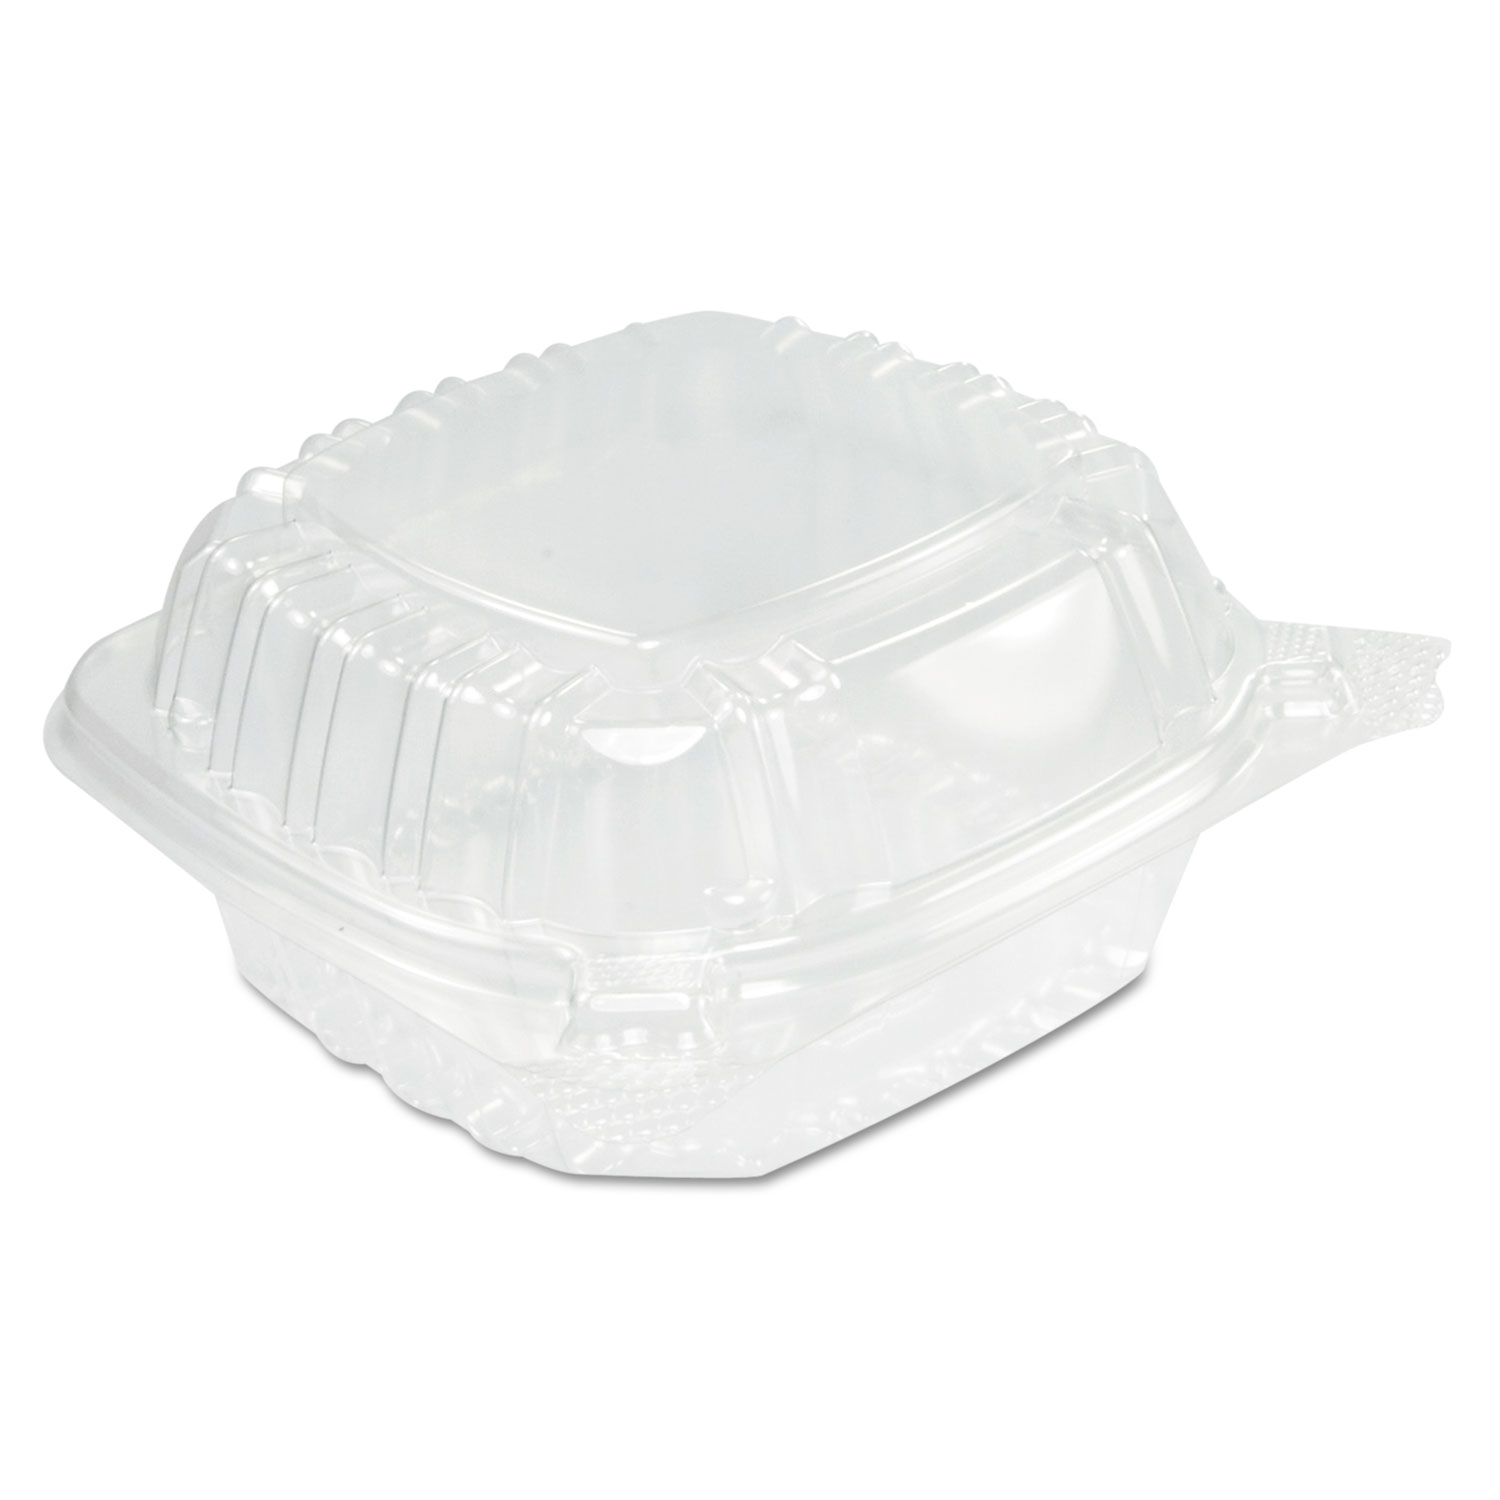  Dart C53PST1 ClearSeal Hinged Clear Containers, 13 4/5 oz, Clear, Plastic, 5.4 x 5.3 x 2.6 (DCCC53PST1) 